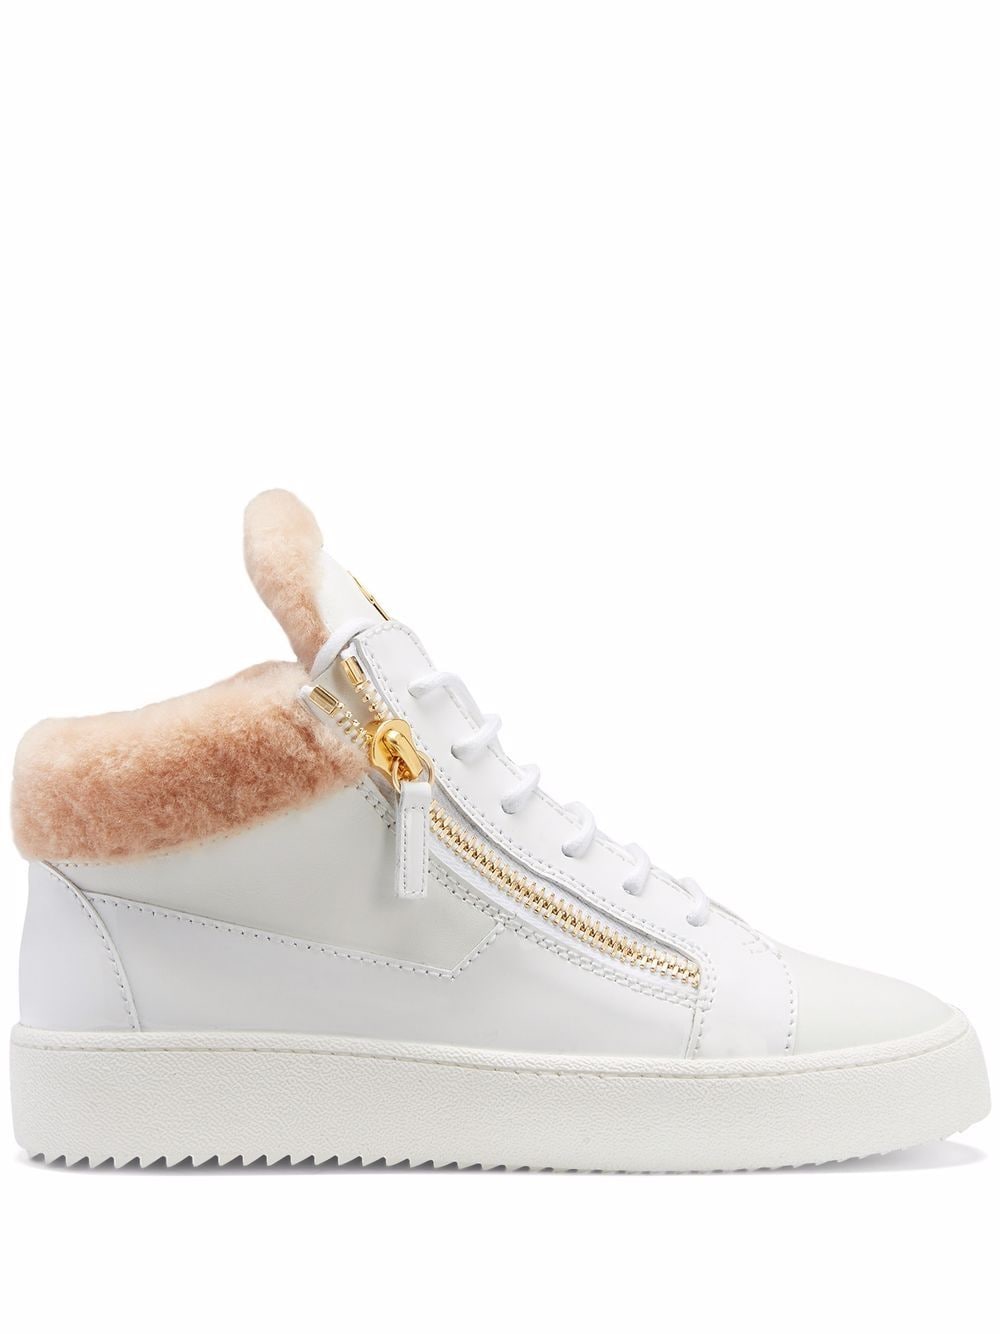 Image 1 of Giuseppe Zanotti Kriss shearling-lined mid-top sneakers